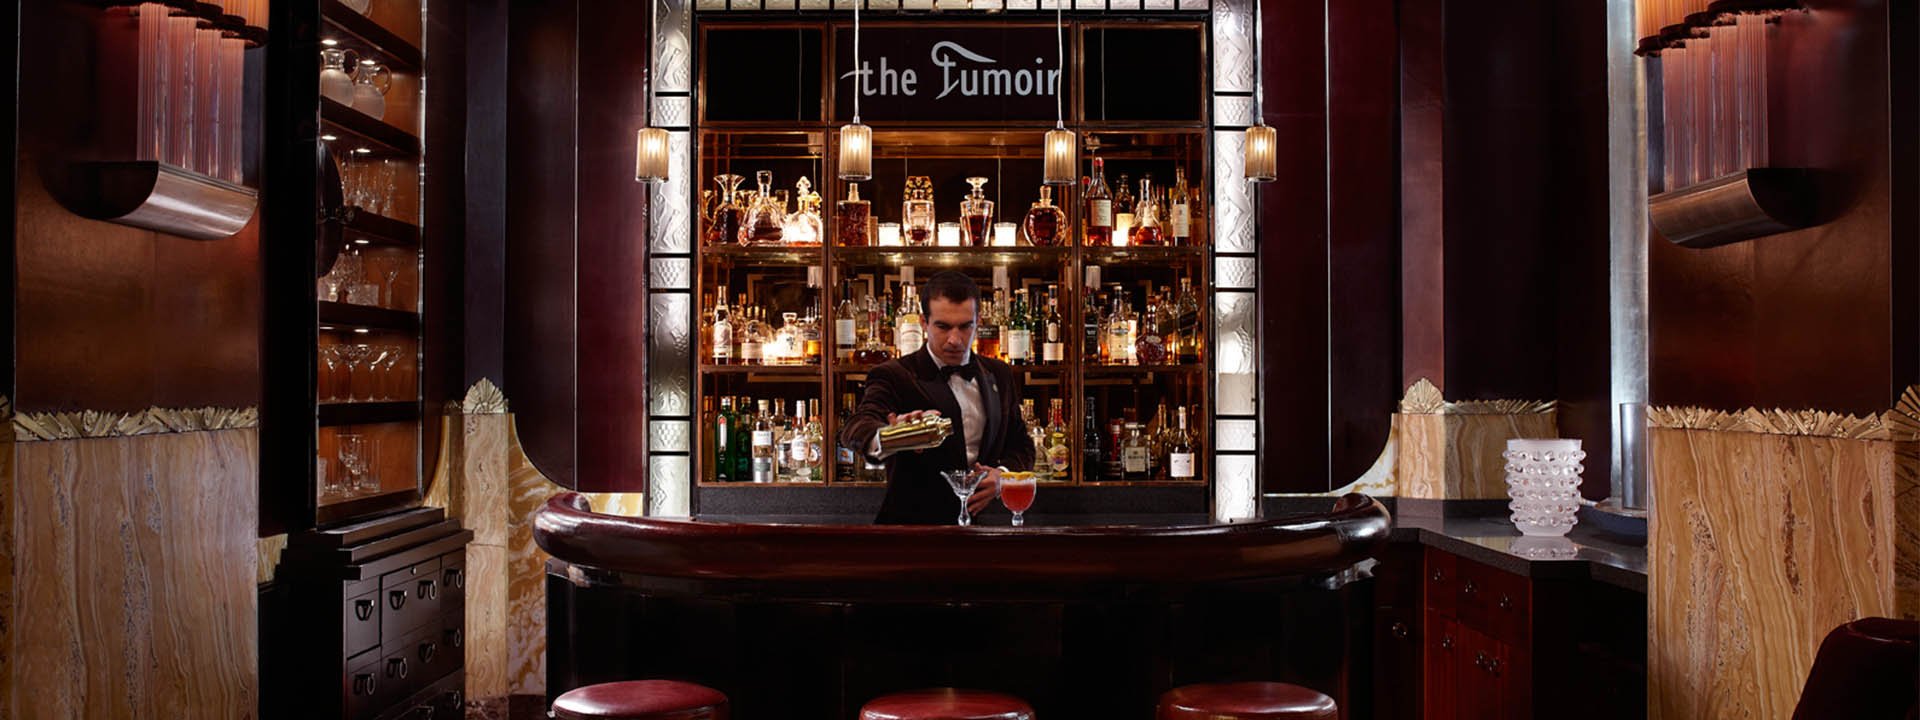 A stylish bartender pours a drink from a shaker into a cocktail glass at Claridge's Bar.